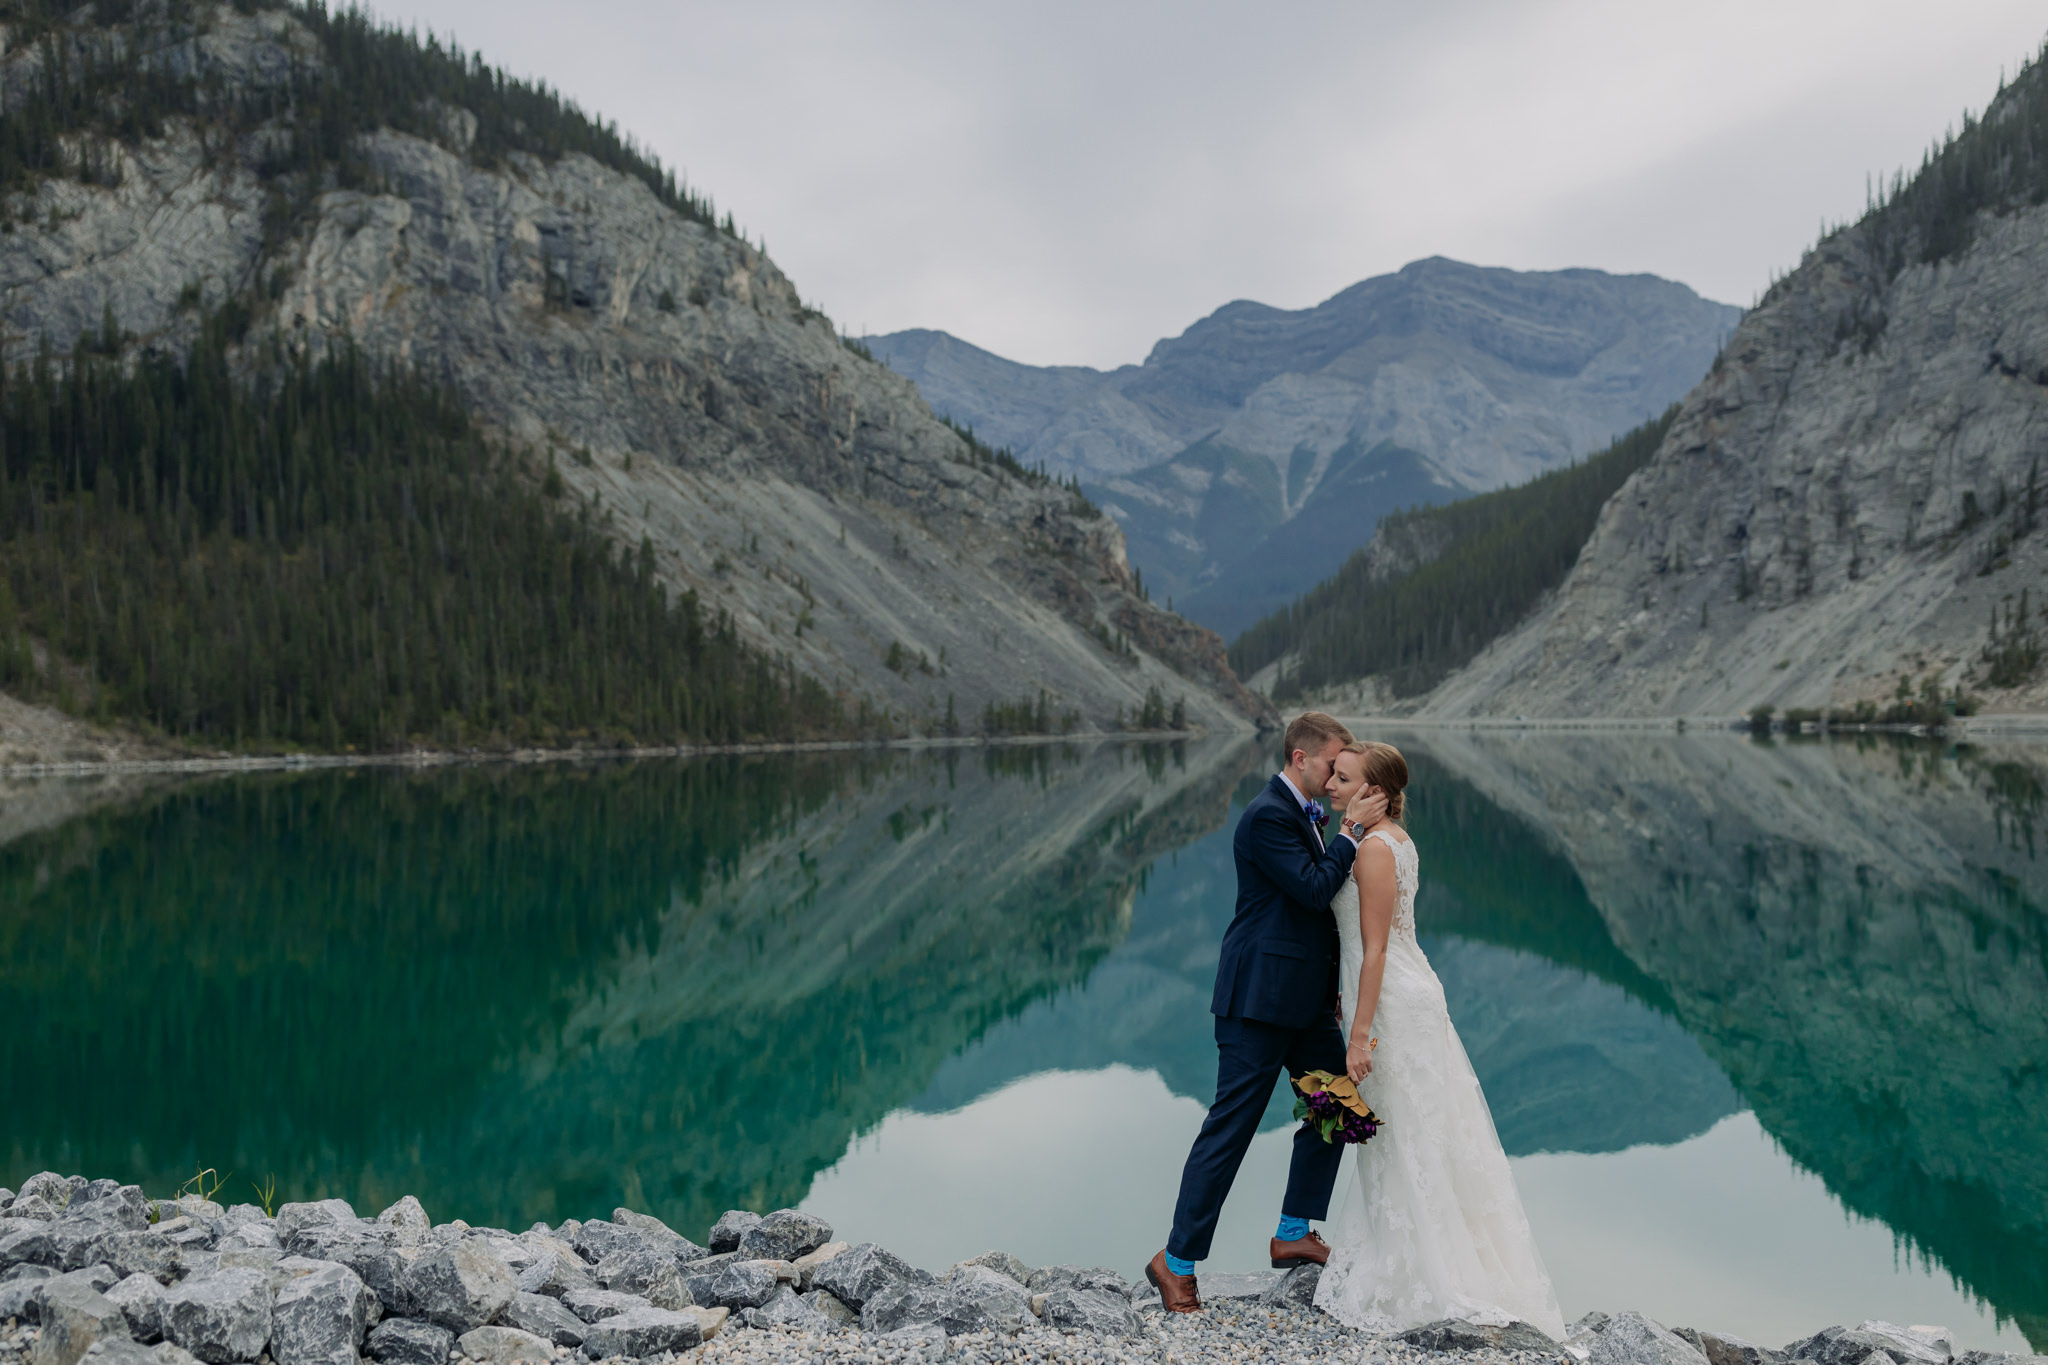 A Guide to Eloping in the Canadian Rockies | Mountain Wedding photographed by ENV Photography | Kananaskis autumn elopement at Whiteman's Pond in the mountains with amazing green water & reflections